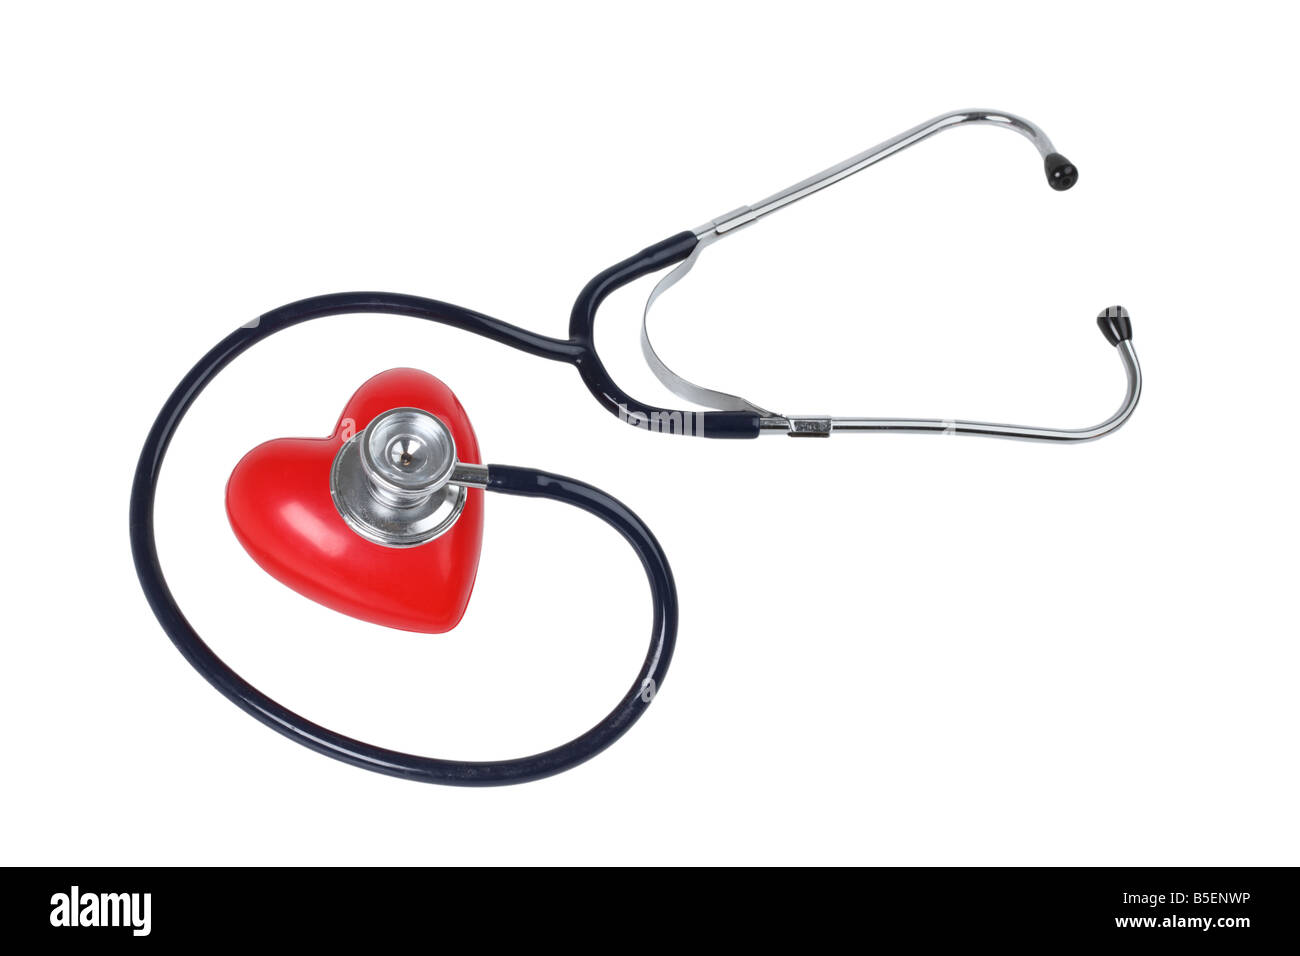 Stethoscope and red heart cutout on white background Stock Photo